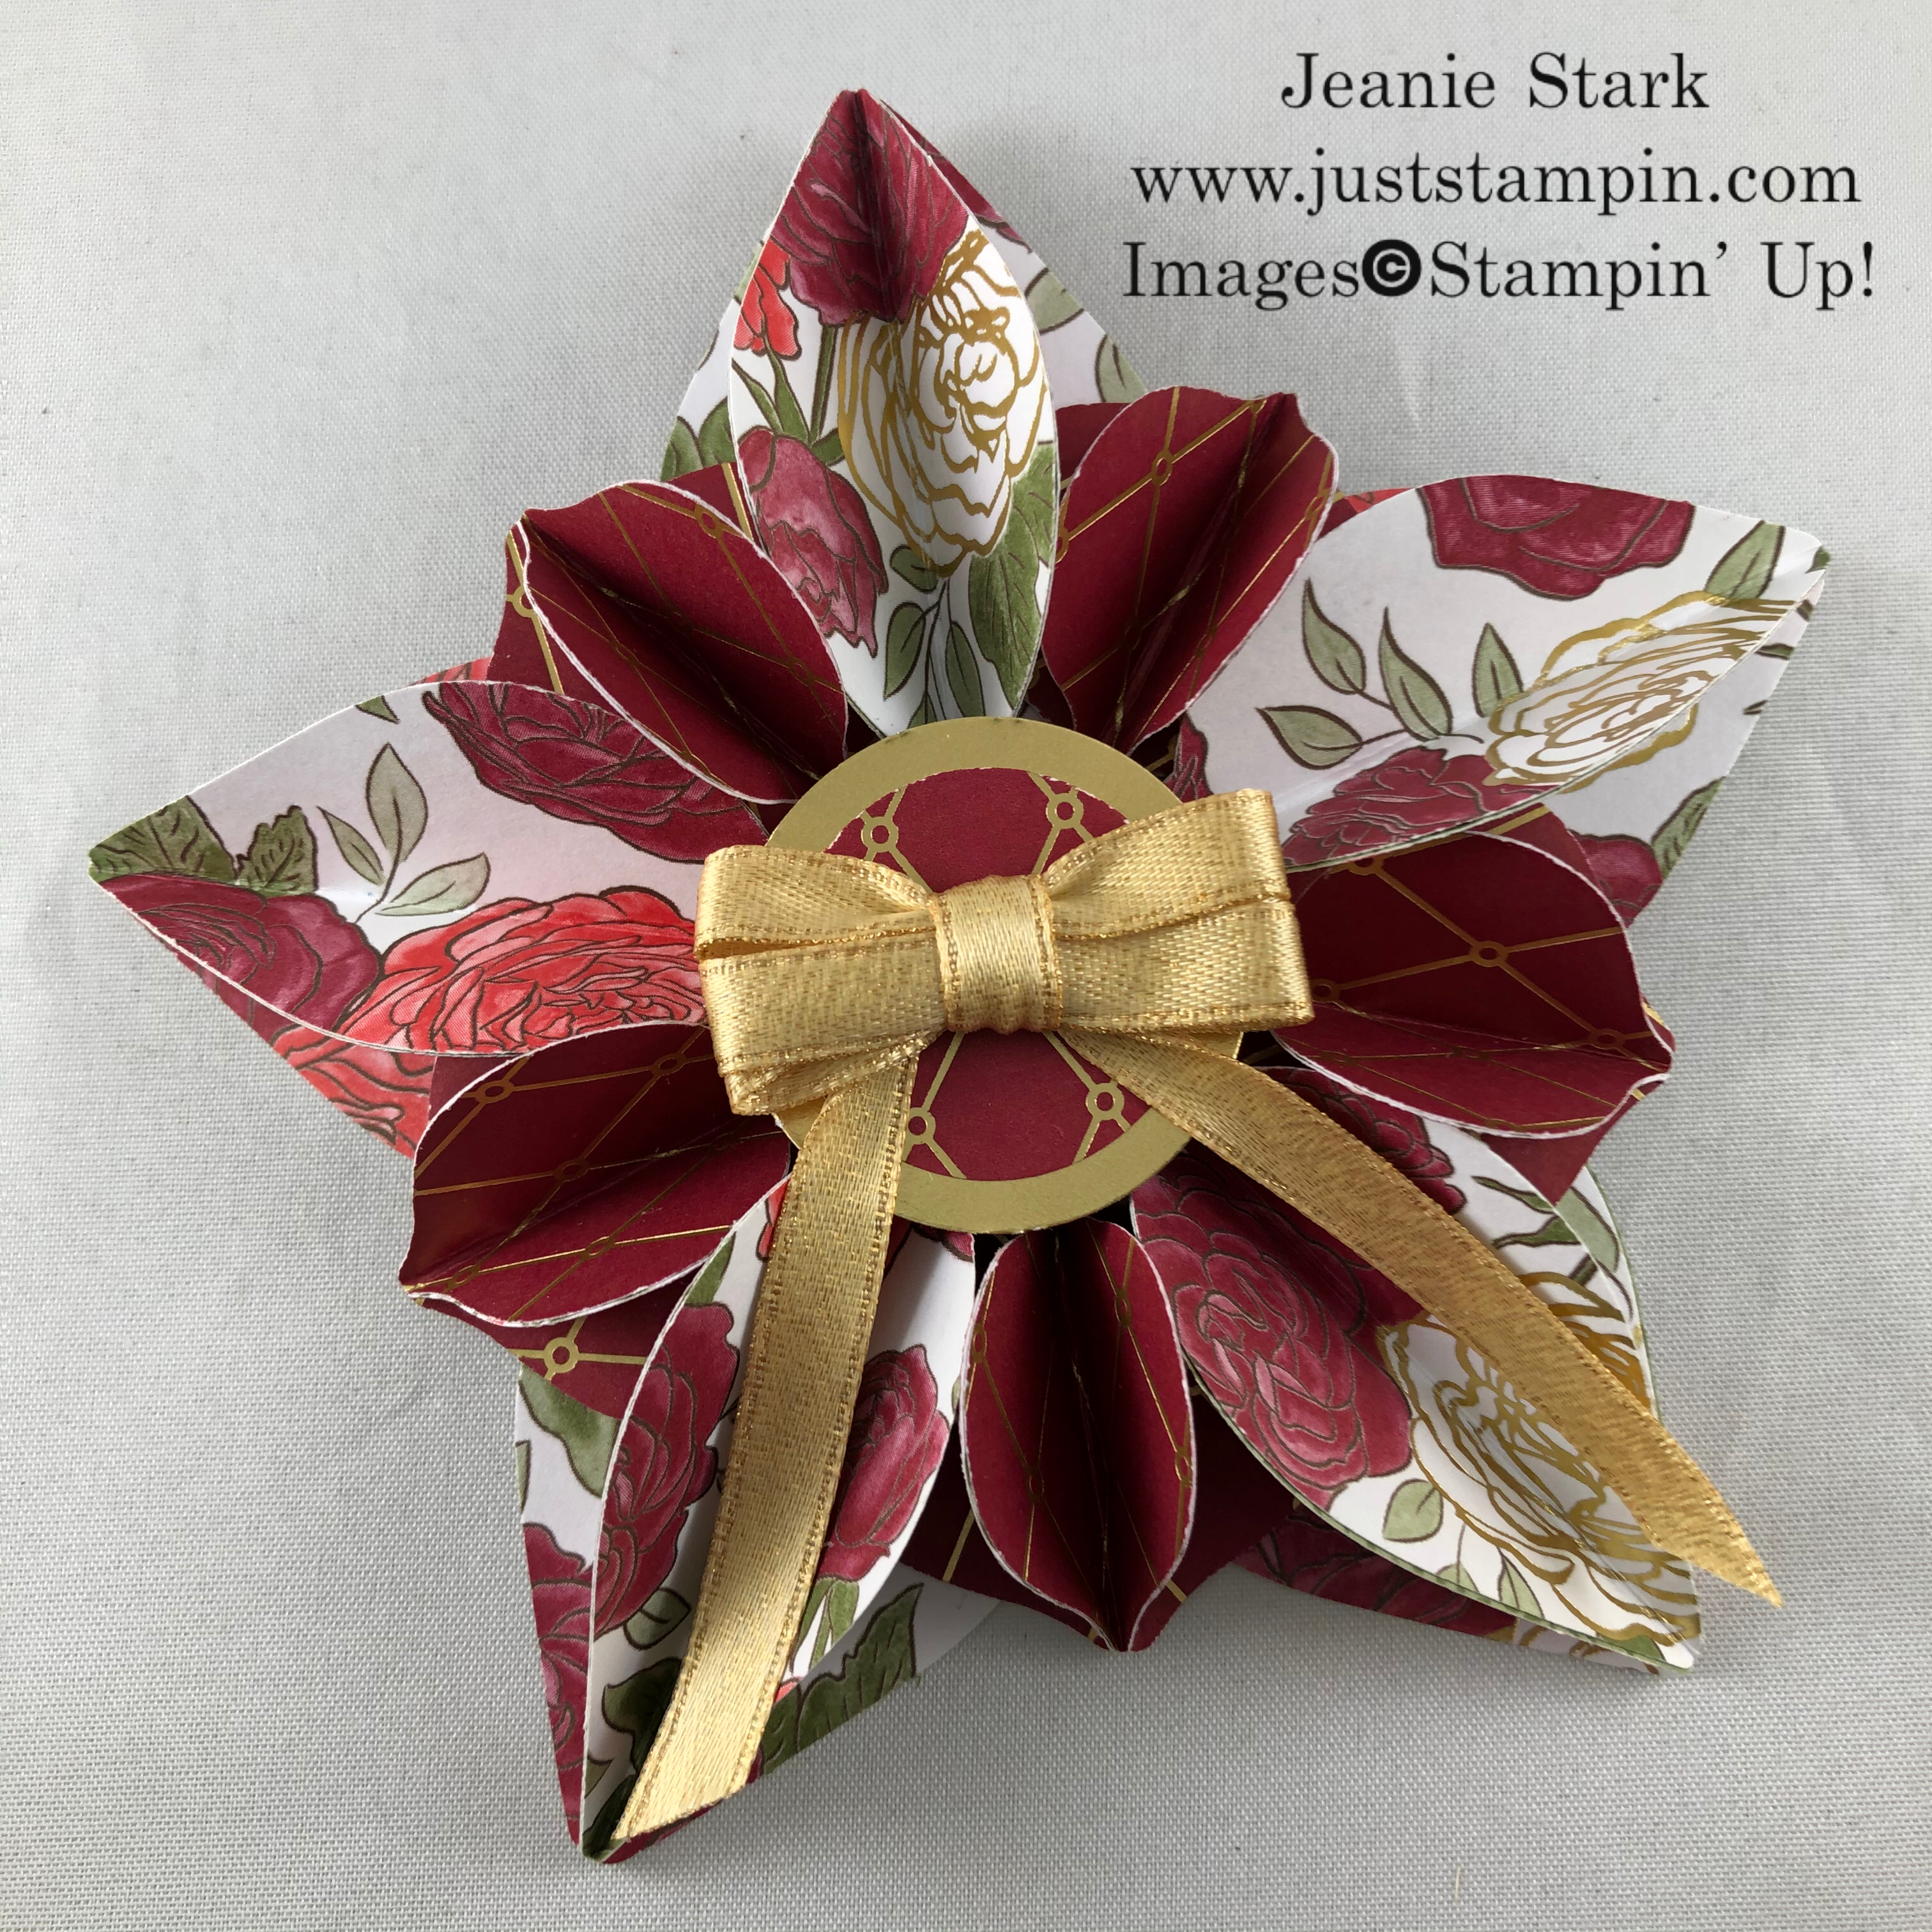 Stampin' Up! Christmastime is Here Specialty Designer Series Paper and Gleaming Ornaments Punch Pack 3D ornament tag or gift idea - Jeanie Stark StampinUp